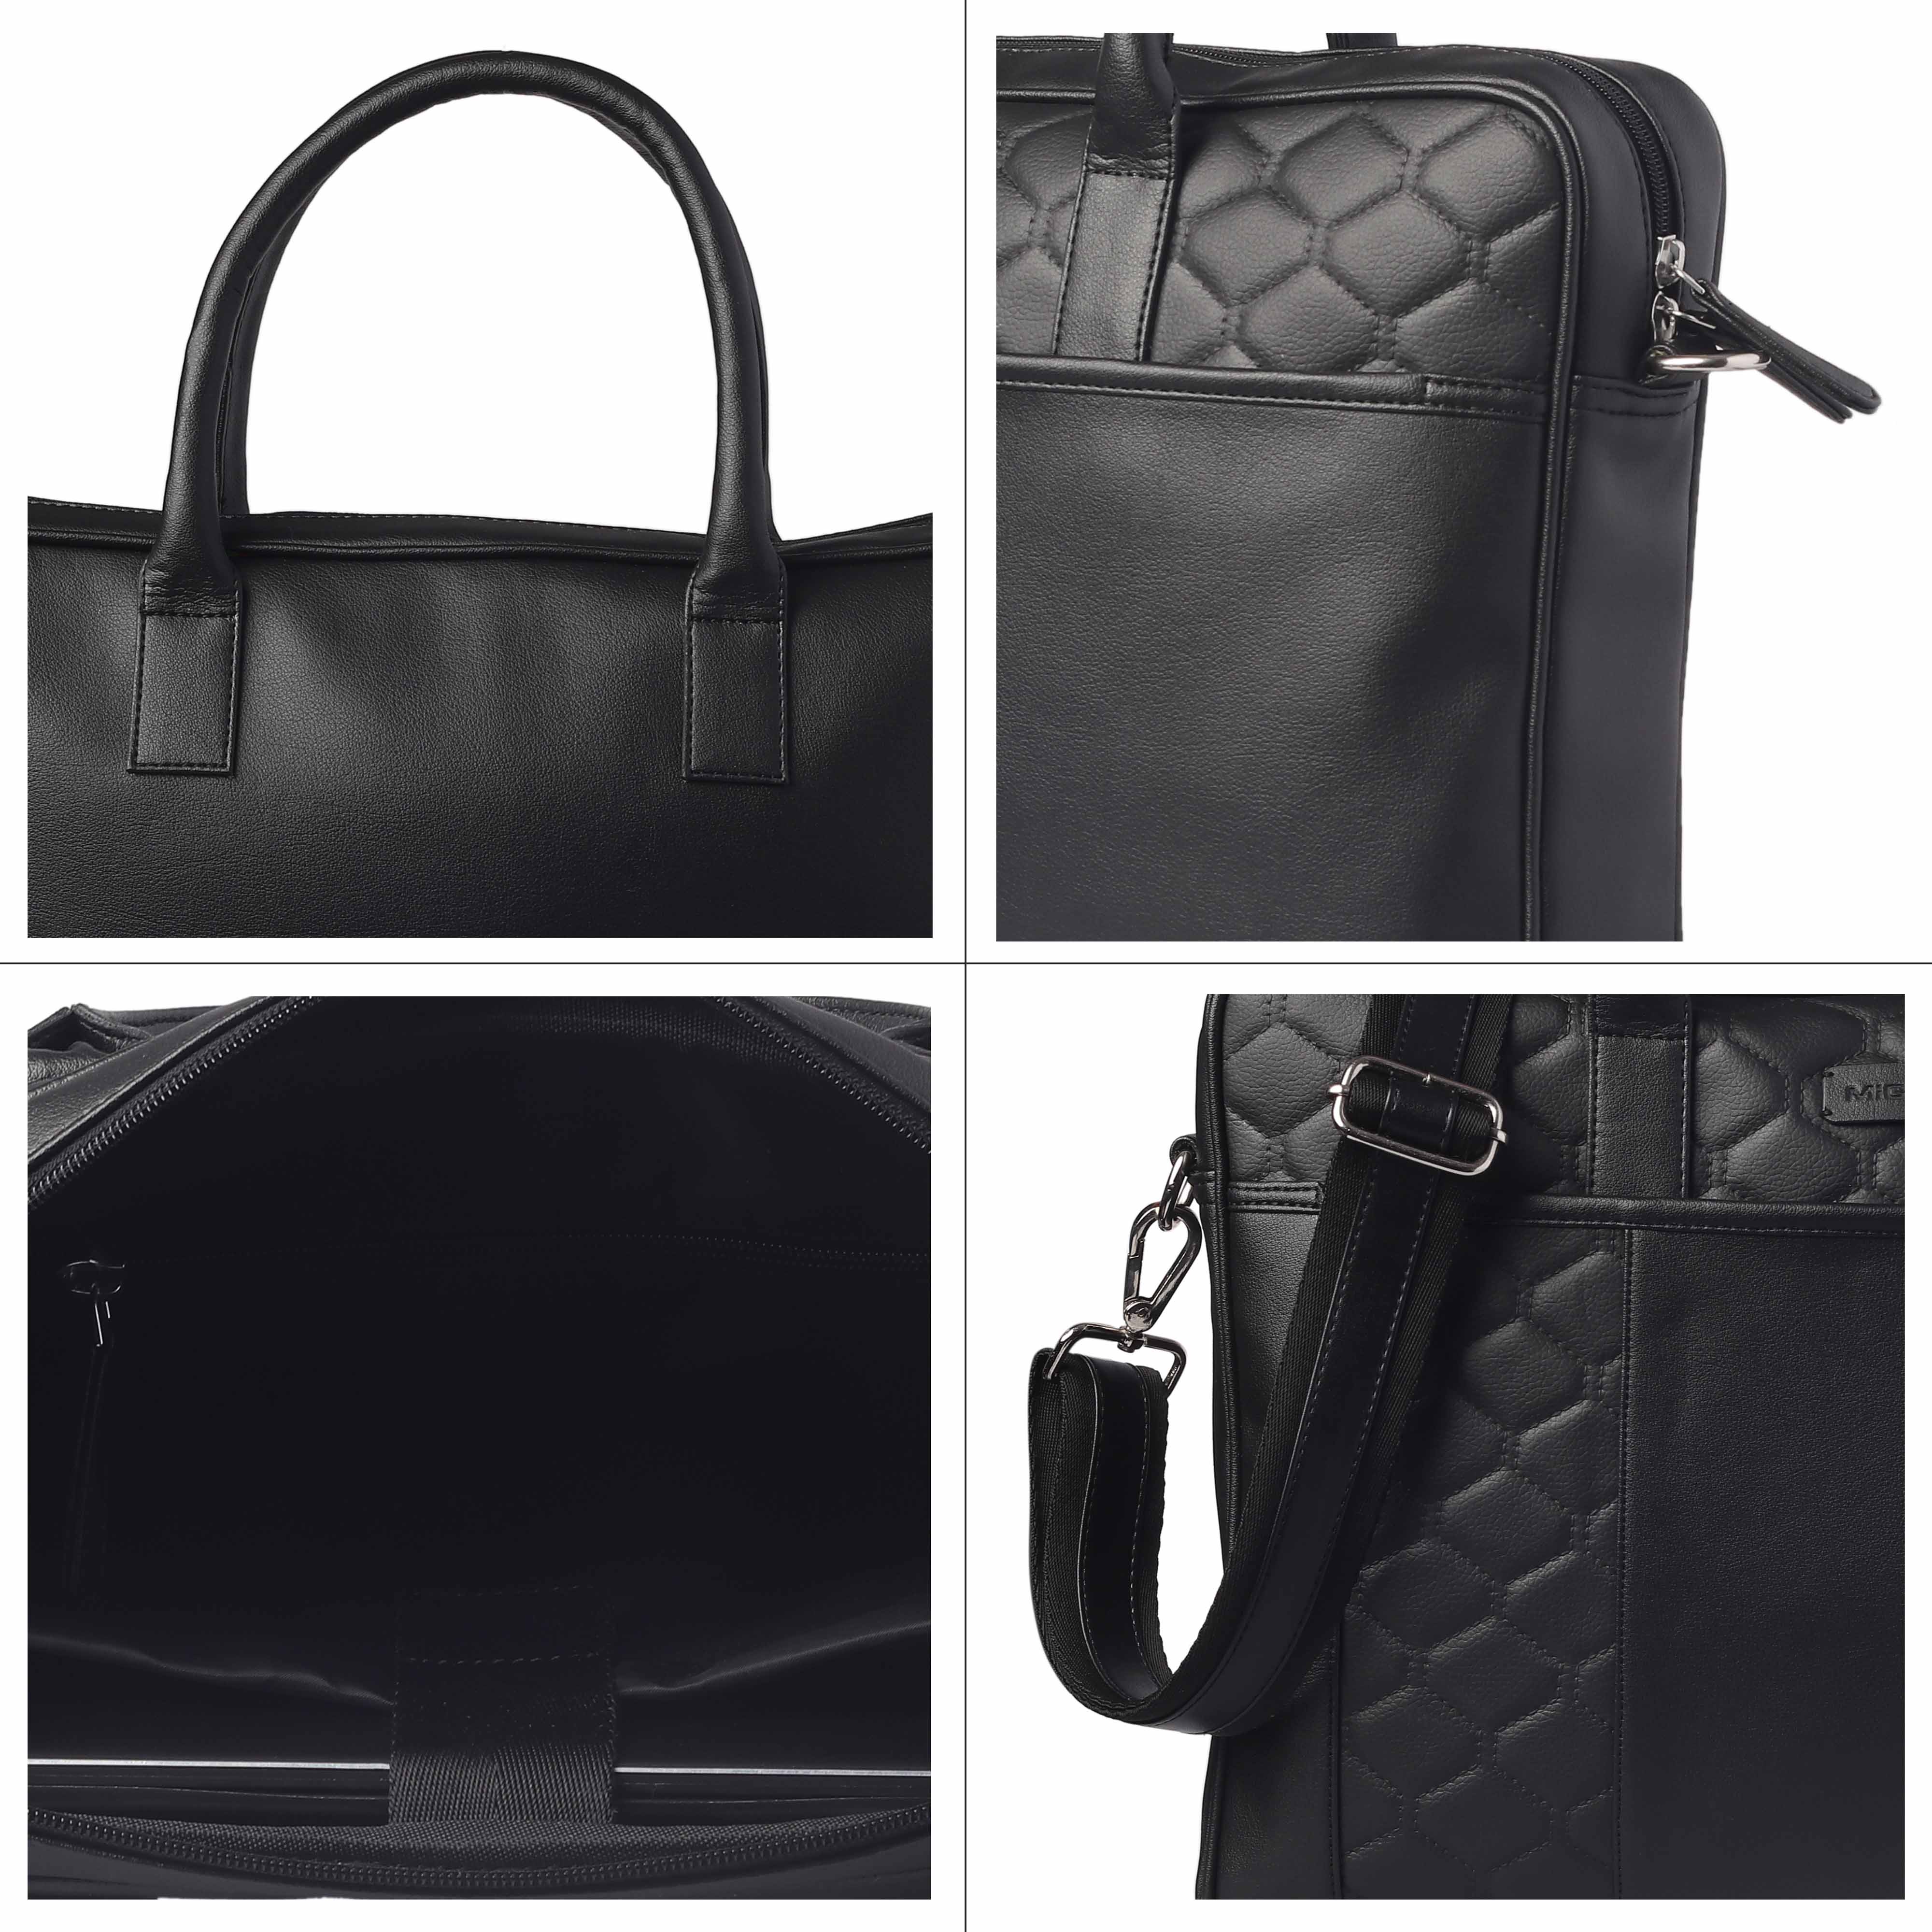 The Runway Quilted Laptop Bag